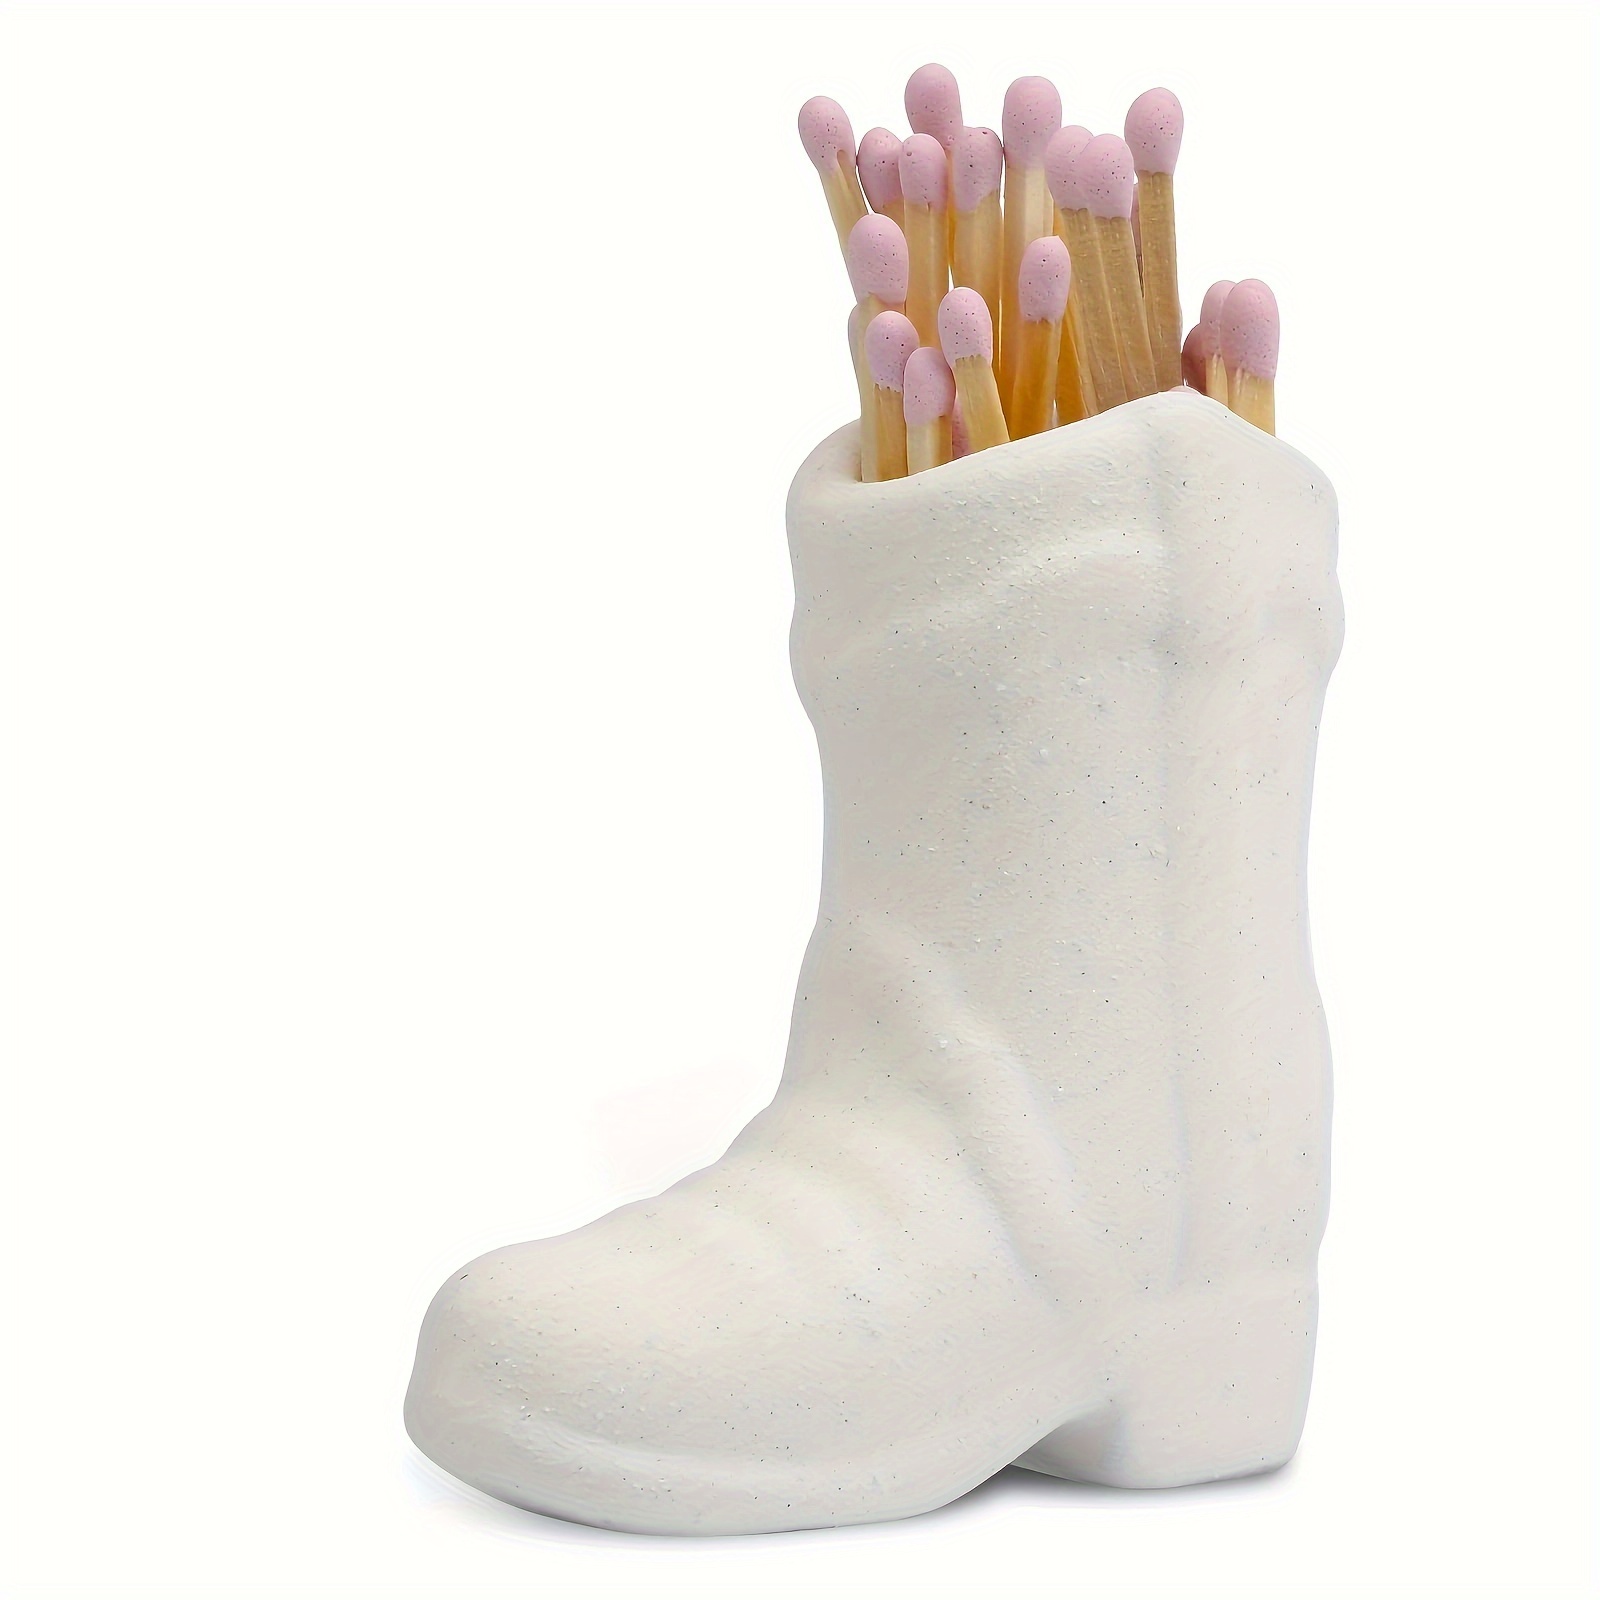 

1pc Cowboy Boot Match Holder, Lovely Christmas Tabletop Ceramic Boot Match Holder With Striker Indoor Household Decoration Accessory, For Bathroom Bedroom Kitchen Home Decoration